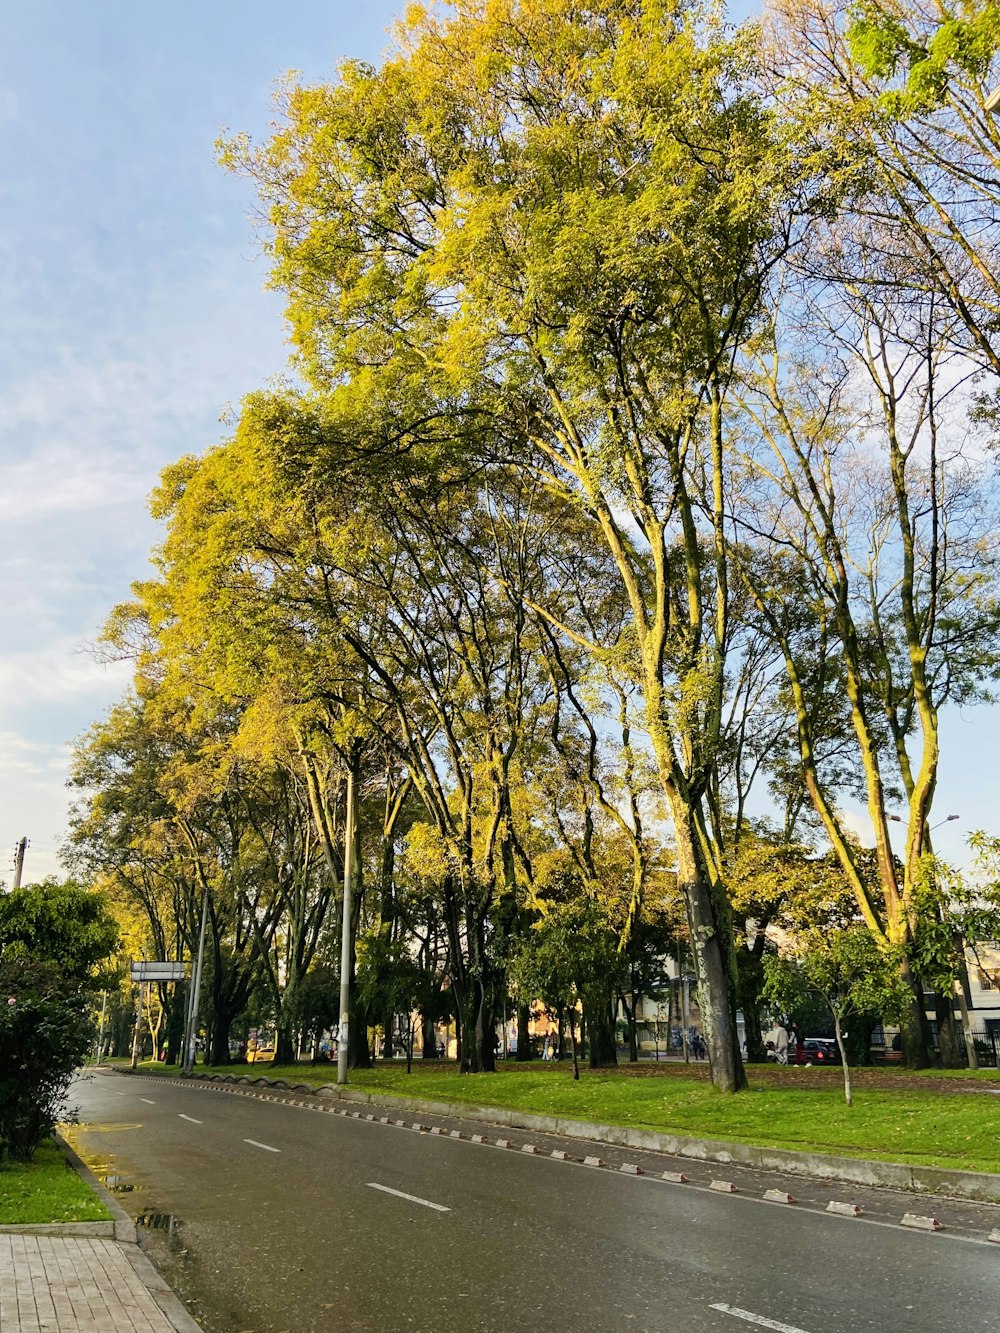 a street lined with lots of trees next to a lush green park